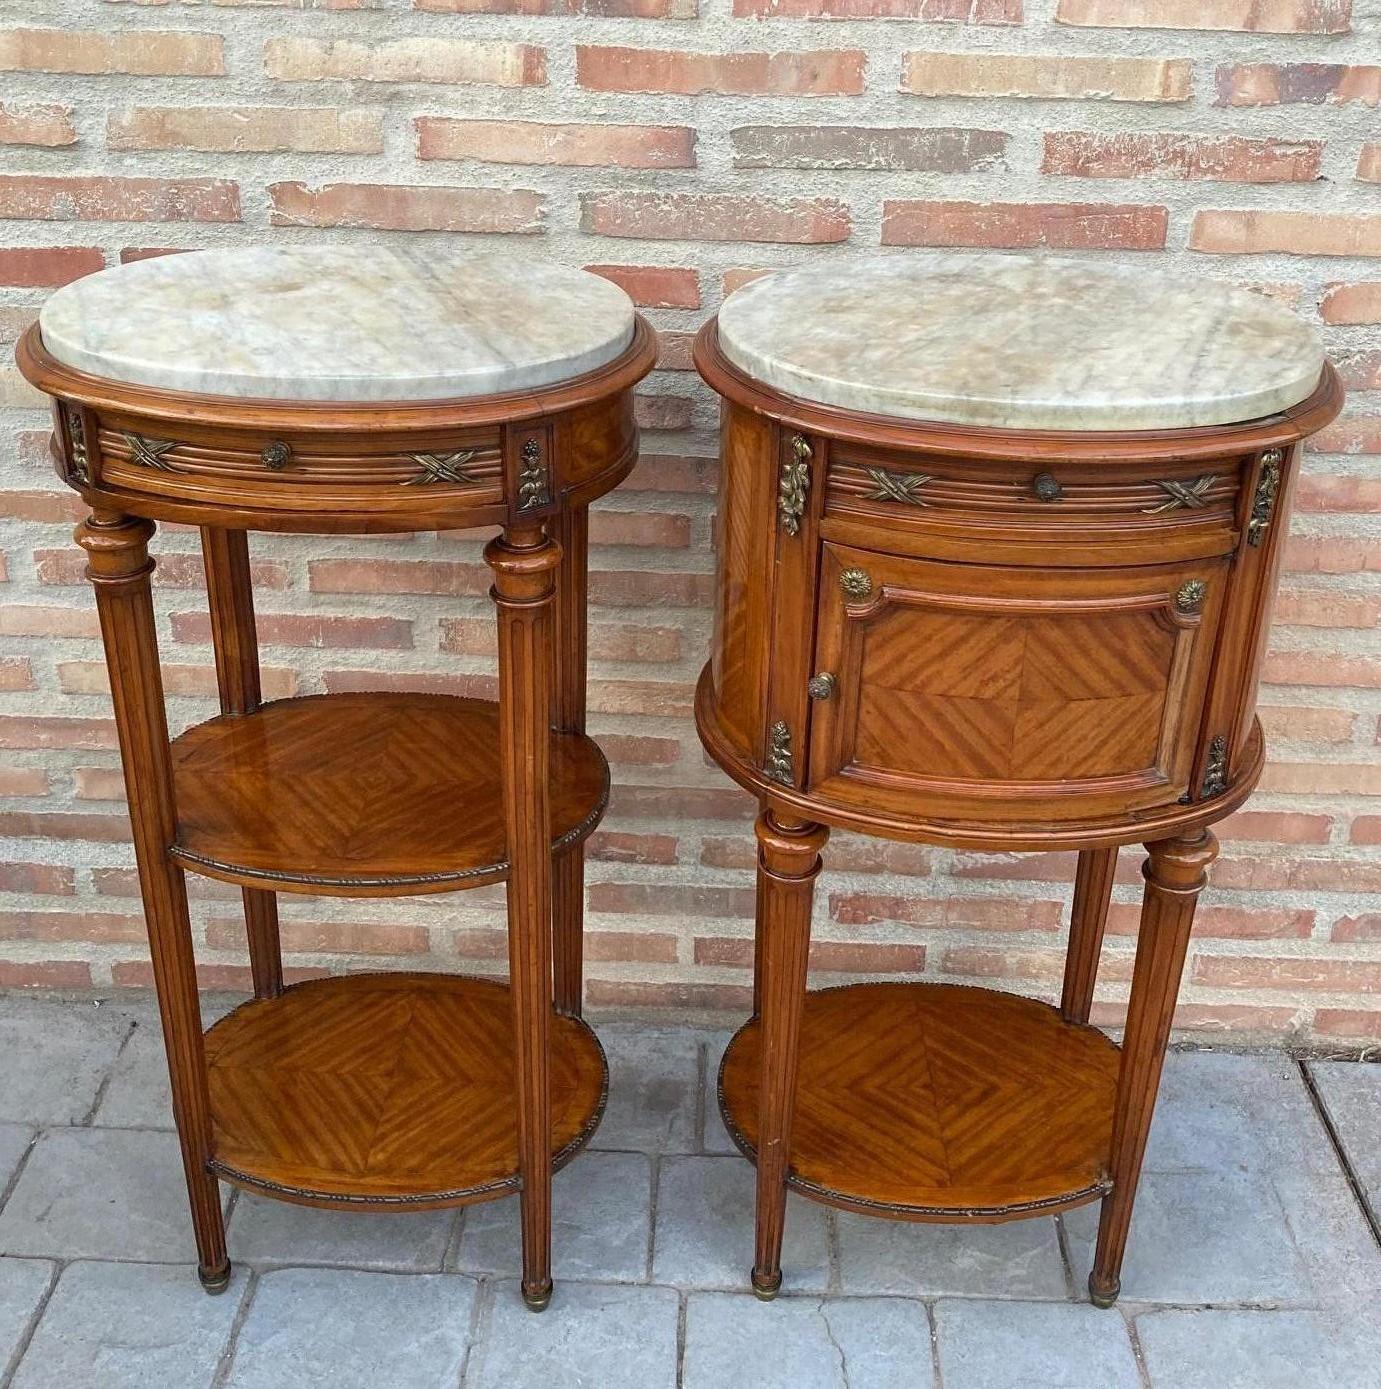 Pair of vintage French Louis XV style oval marble-top Bronze mounts nightstands. Item features oval marble top, beautiful wood grain, finished back, 1 dovetailed drawer, cabriole legs, great style and form, circa early to mid-20th century.